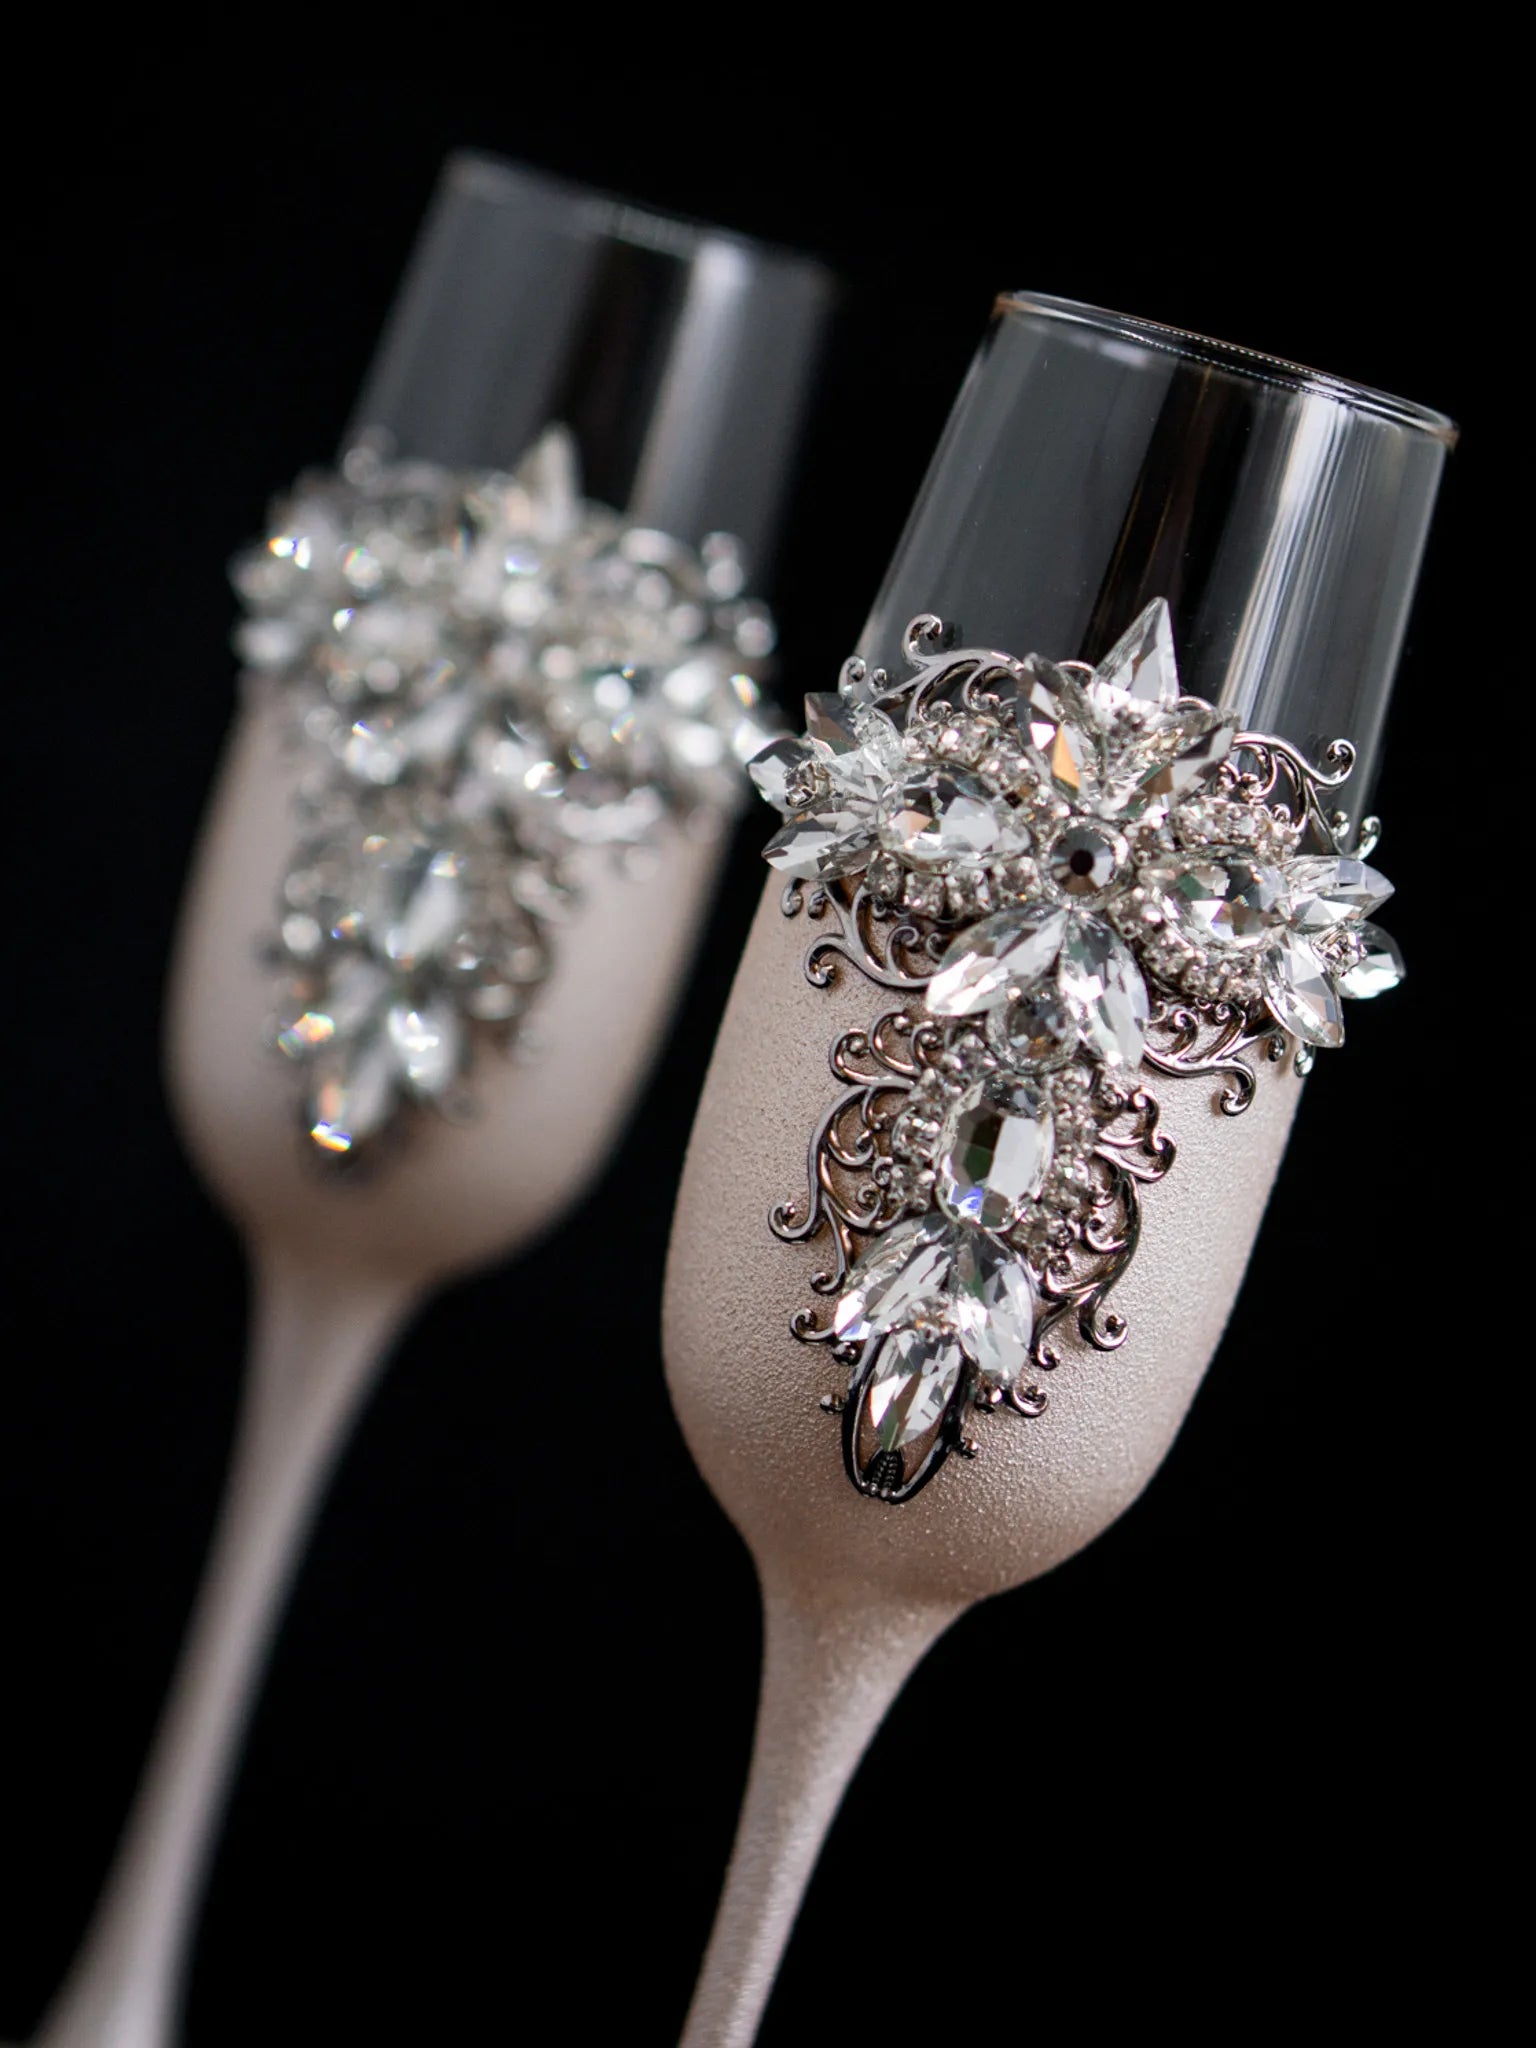 Personalized wedding champagne glasses in ivory